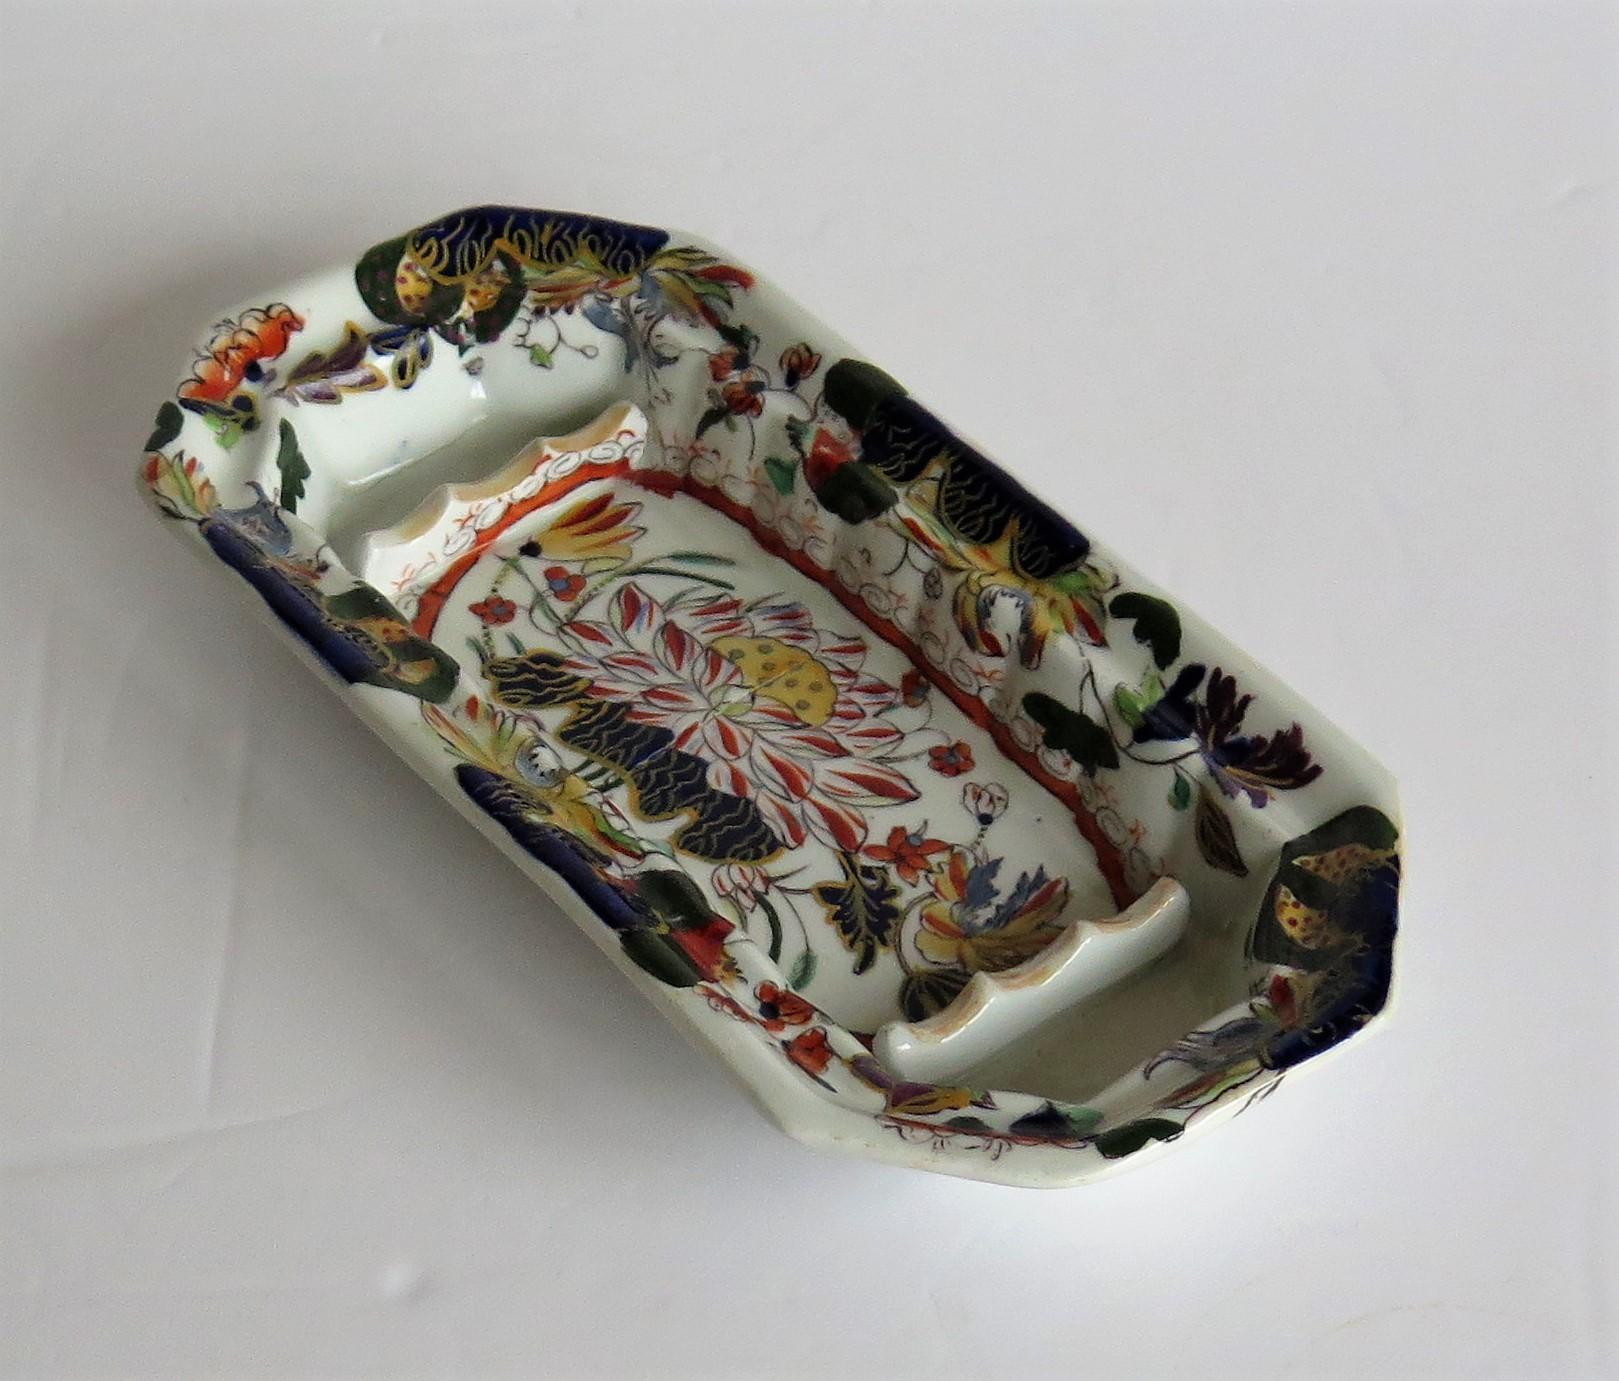 Hand-Painted Rare Mason's Ironstone Pen Tray or Dish in Water Lily Pattern, circa 1830